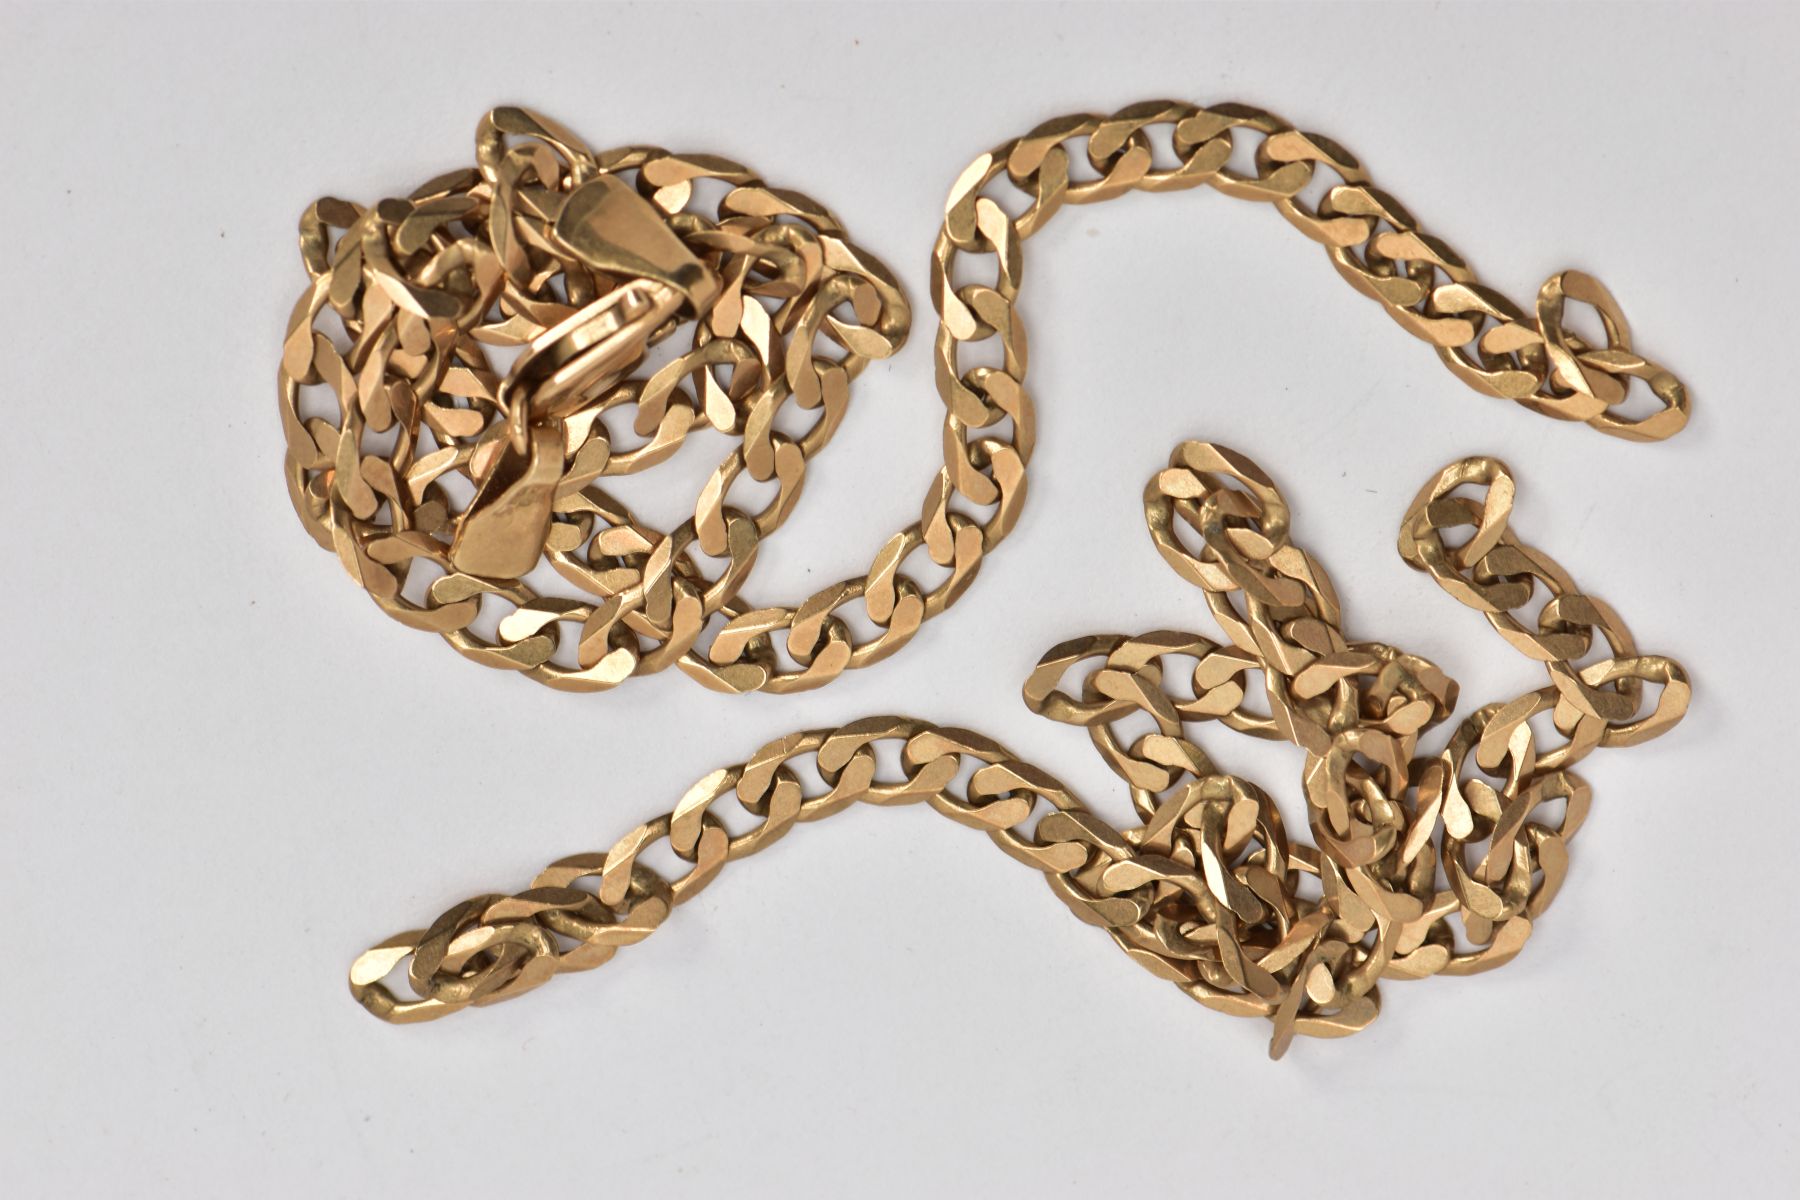 A BROKEN 9CT GOLD CURB LINK CHAIN, hallmarked 9ct gold Sheffield, approximate gross weight 6.6 - Image 2 of 2